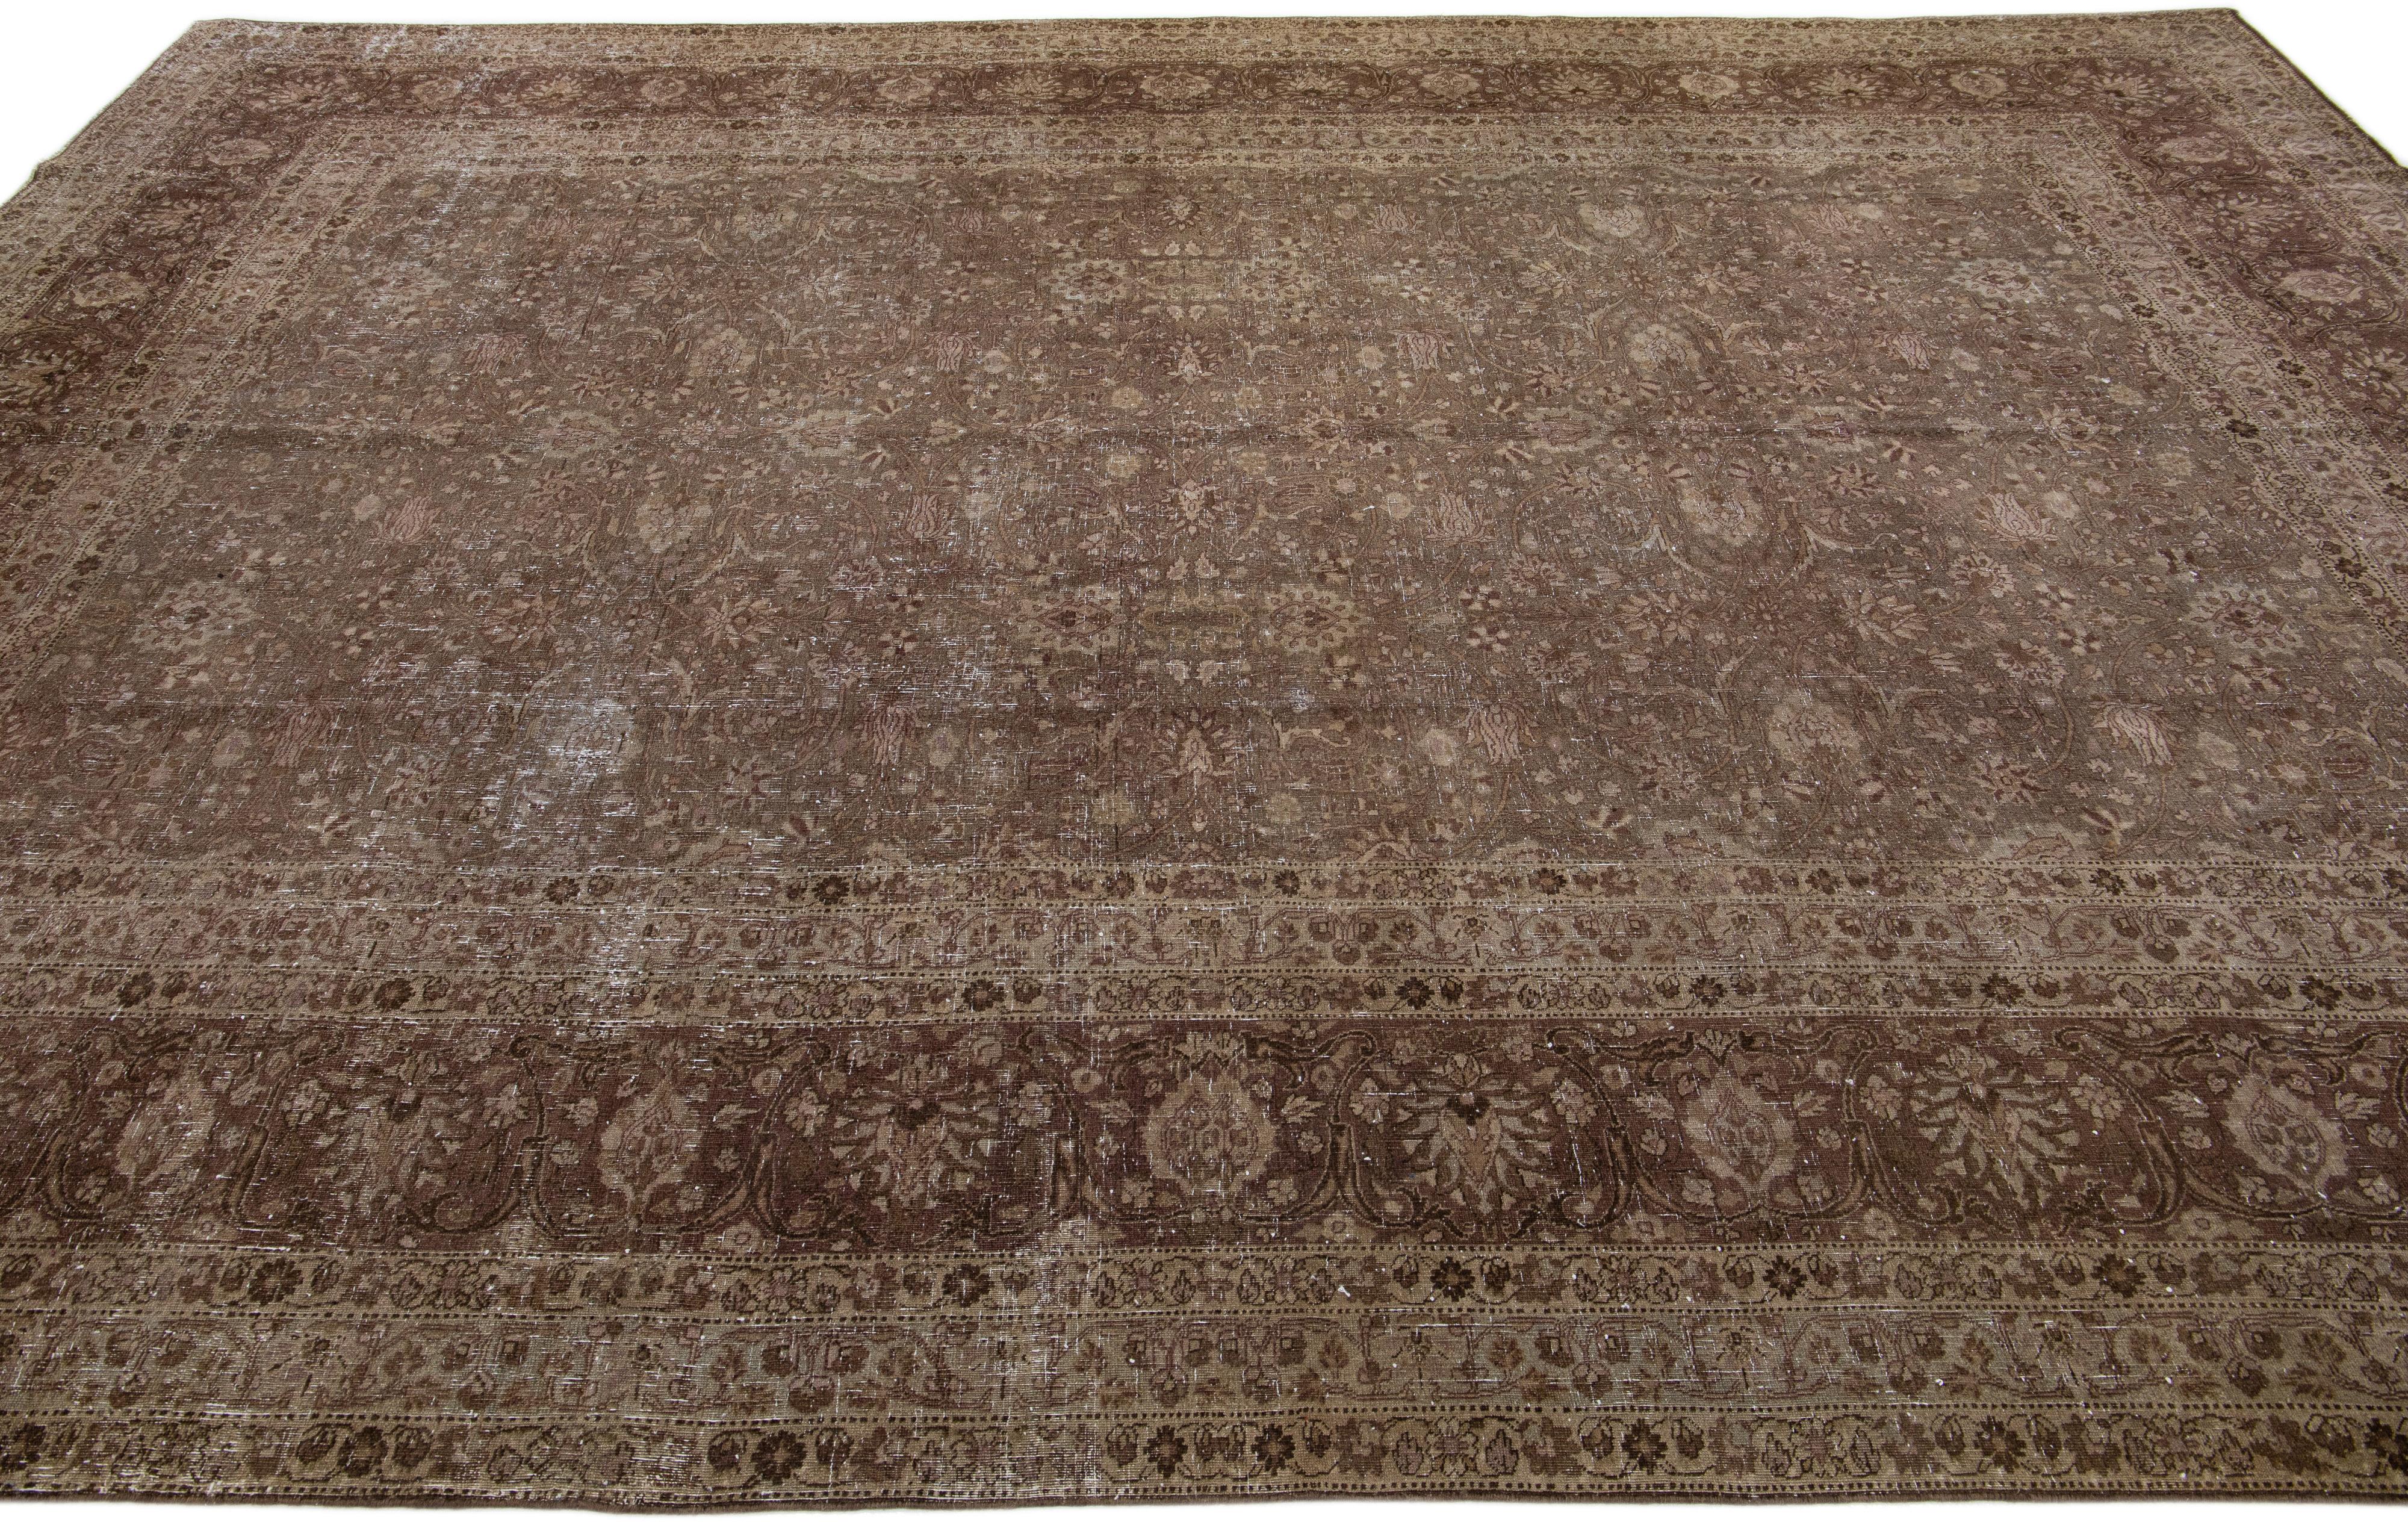 Floral Antique Persian Tabriz Brown Handmade Wool Rug In Good Condition For Sale In Norwalk, CT